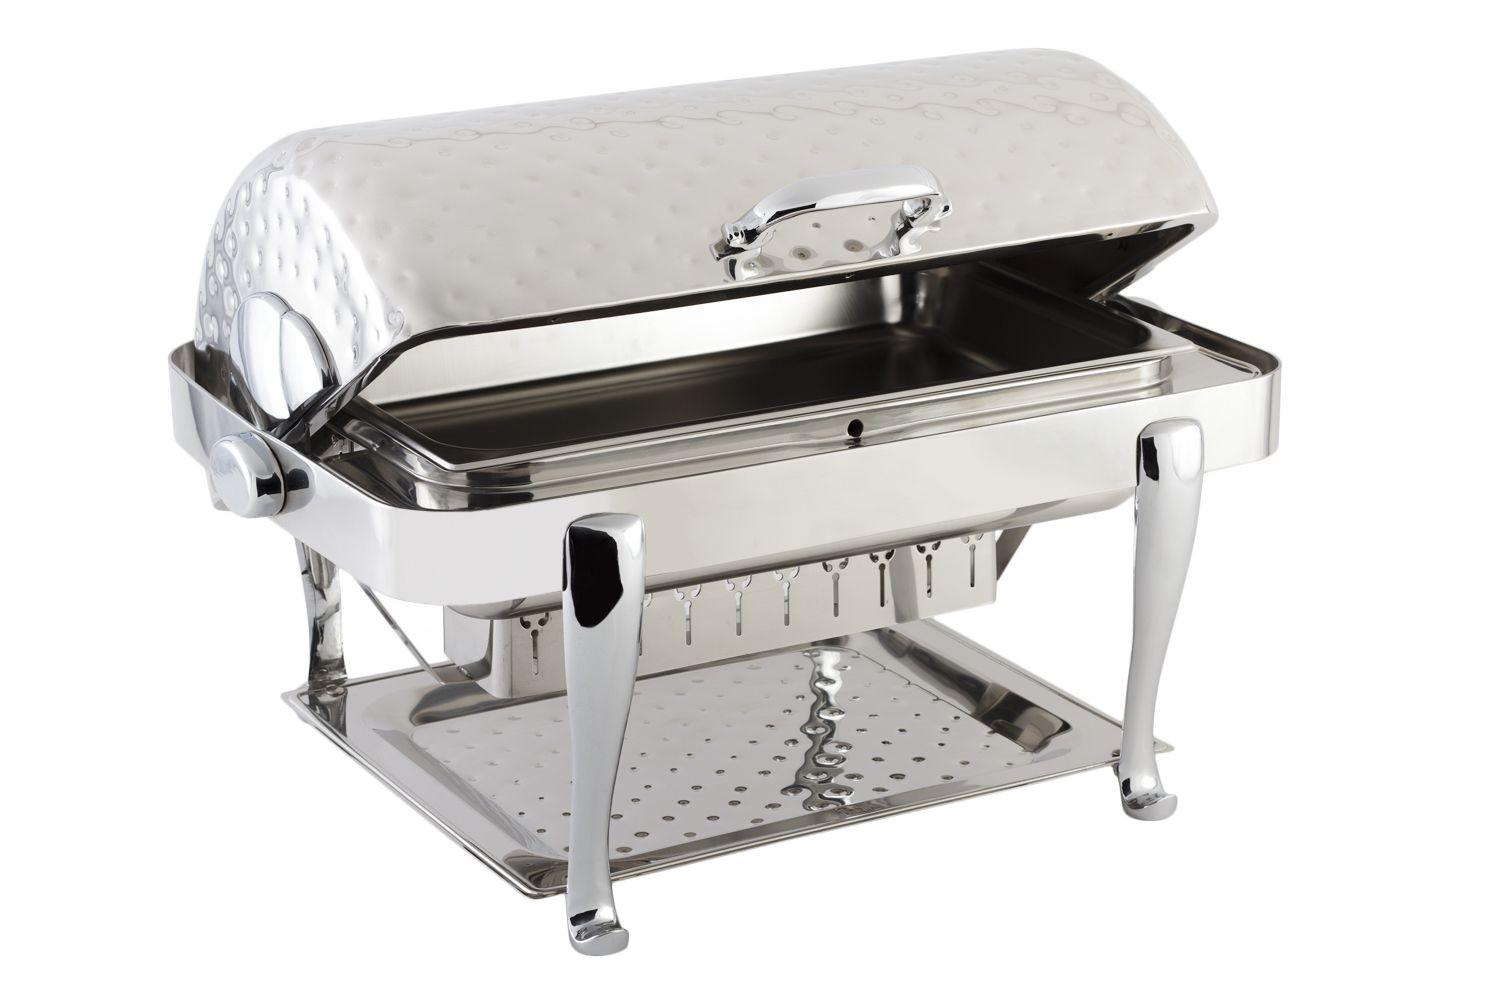 Bon Chef 19040CHH Elite Dripless Rectangular Roll Top Chafer with Chrome Accents, Hammered Finish, Roman Legs, 8 Qt.